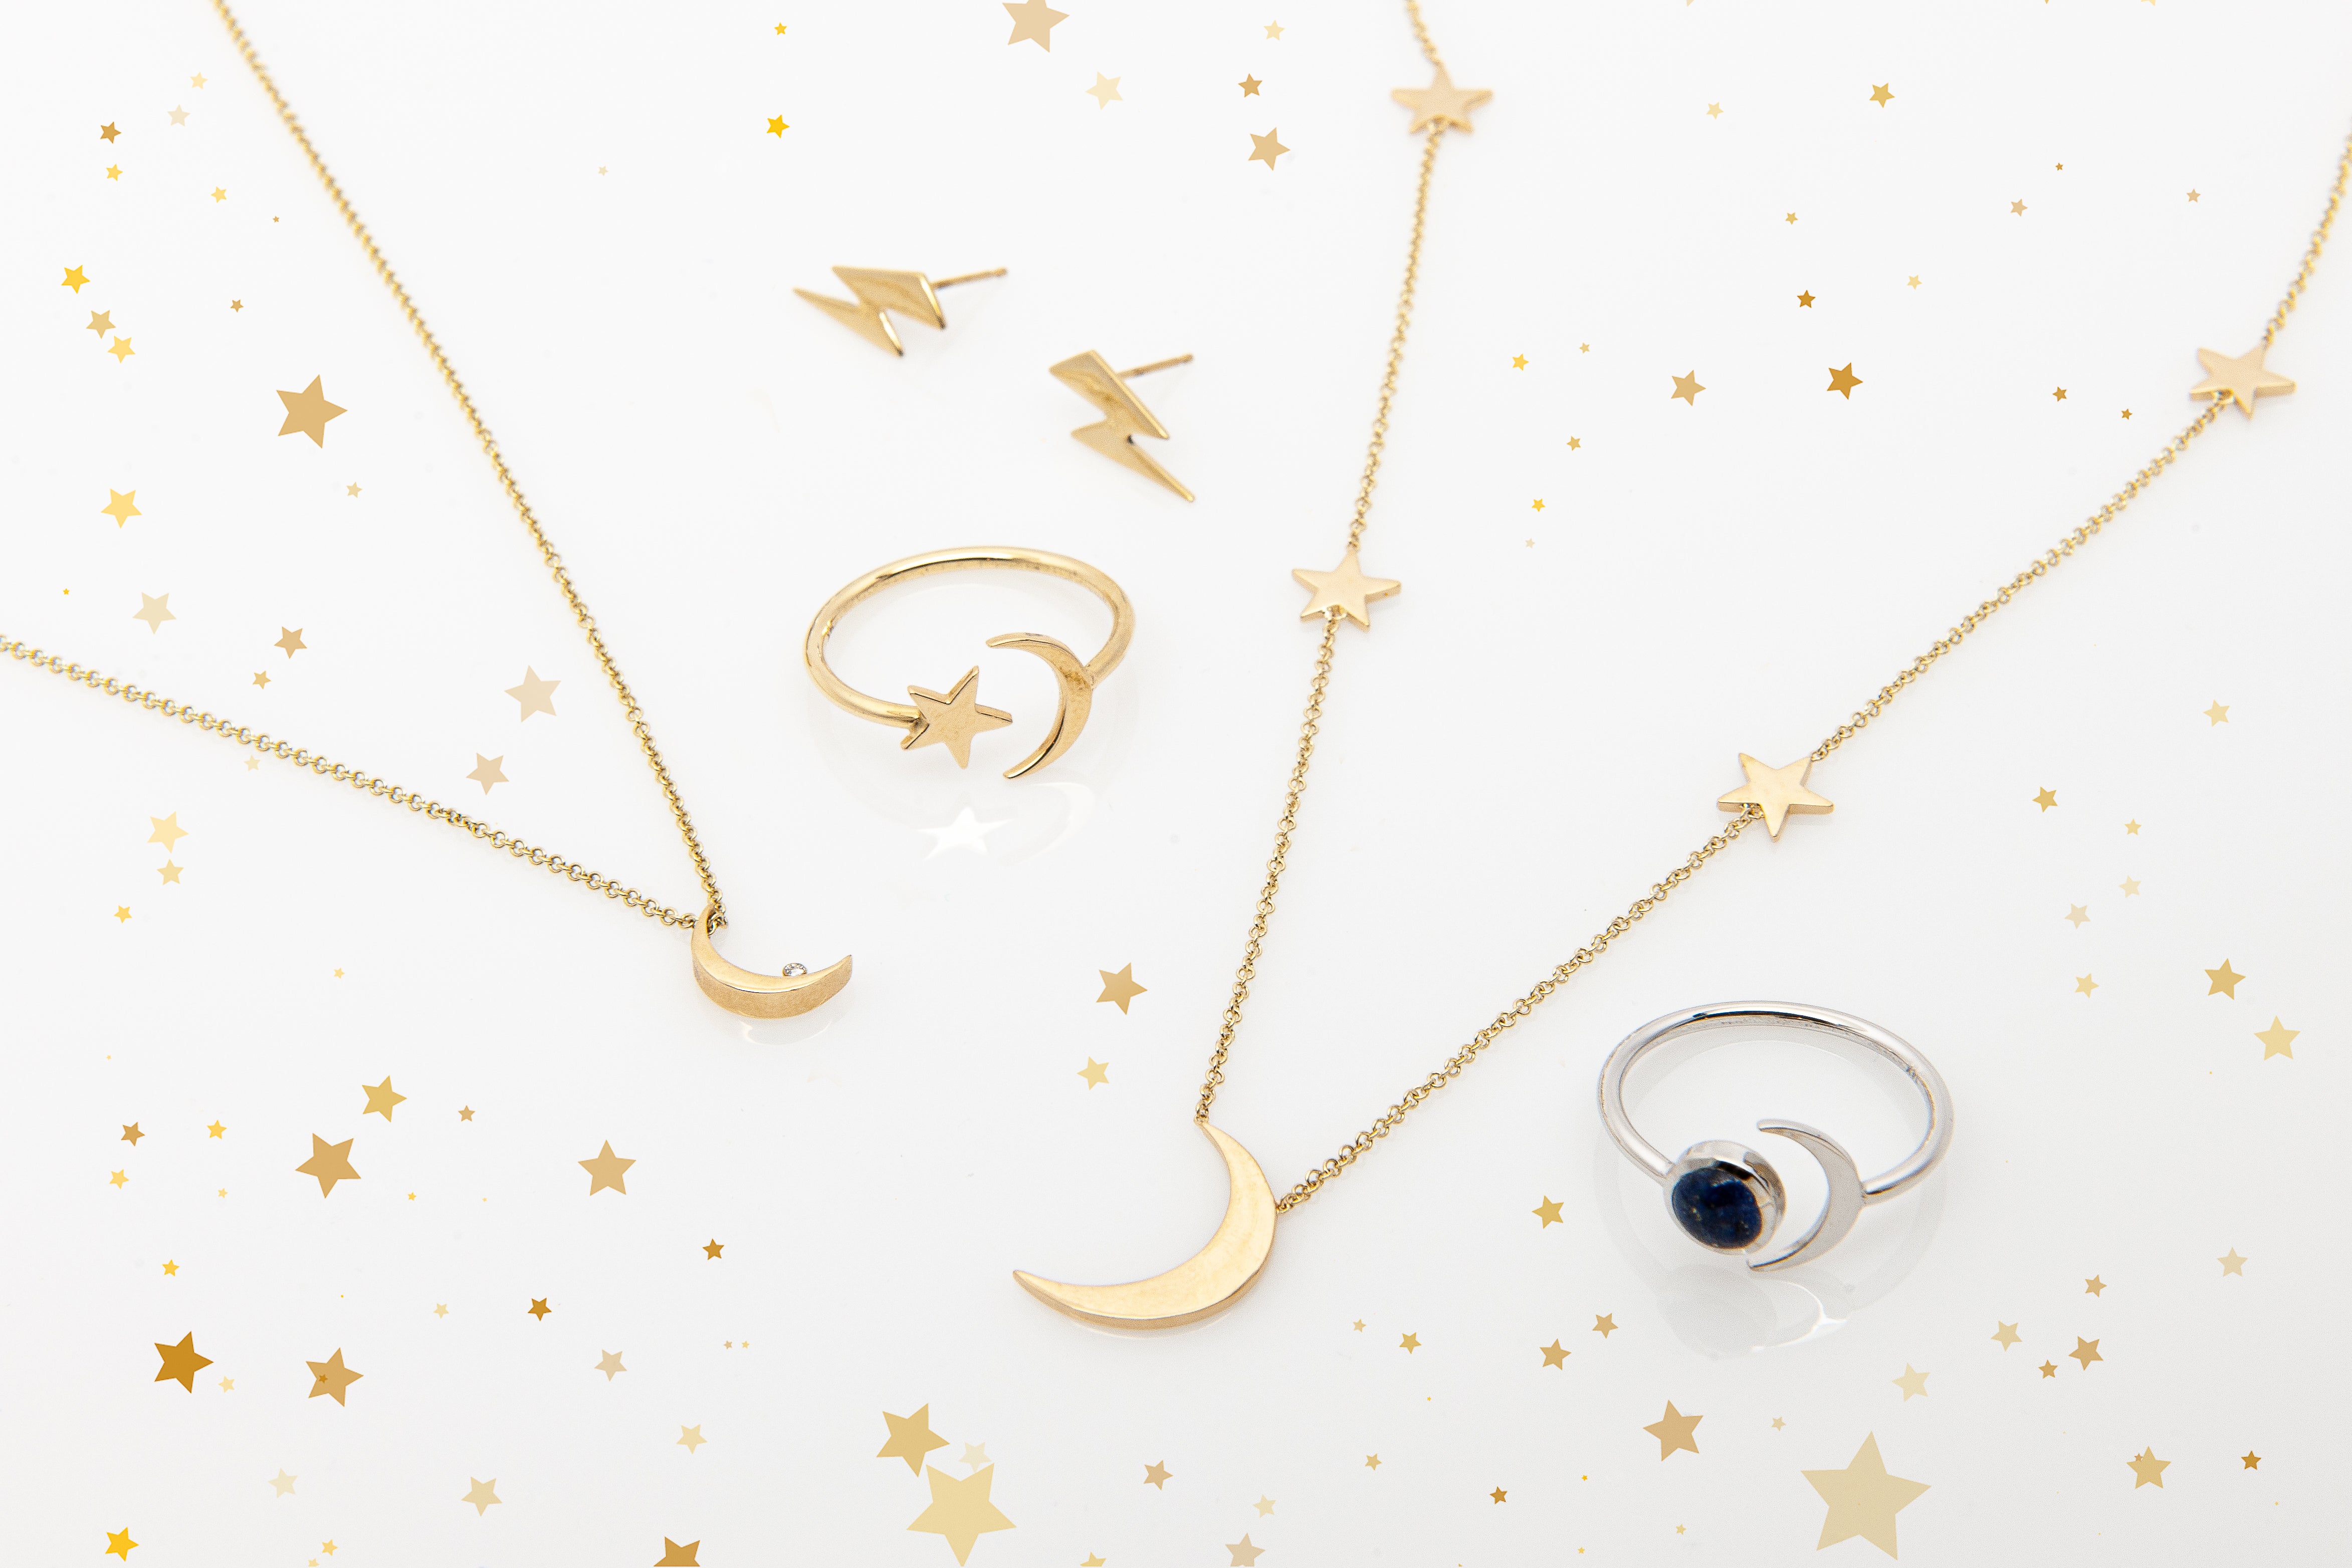 A preview of Starflower Jewelry’s celestial collection, including 14k Yellow Gold Crescent Moon with Diamond Pendant.